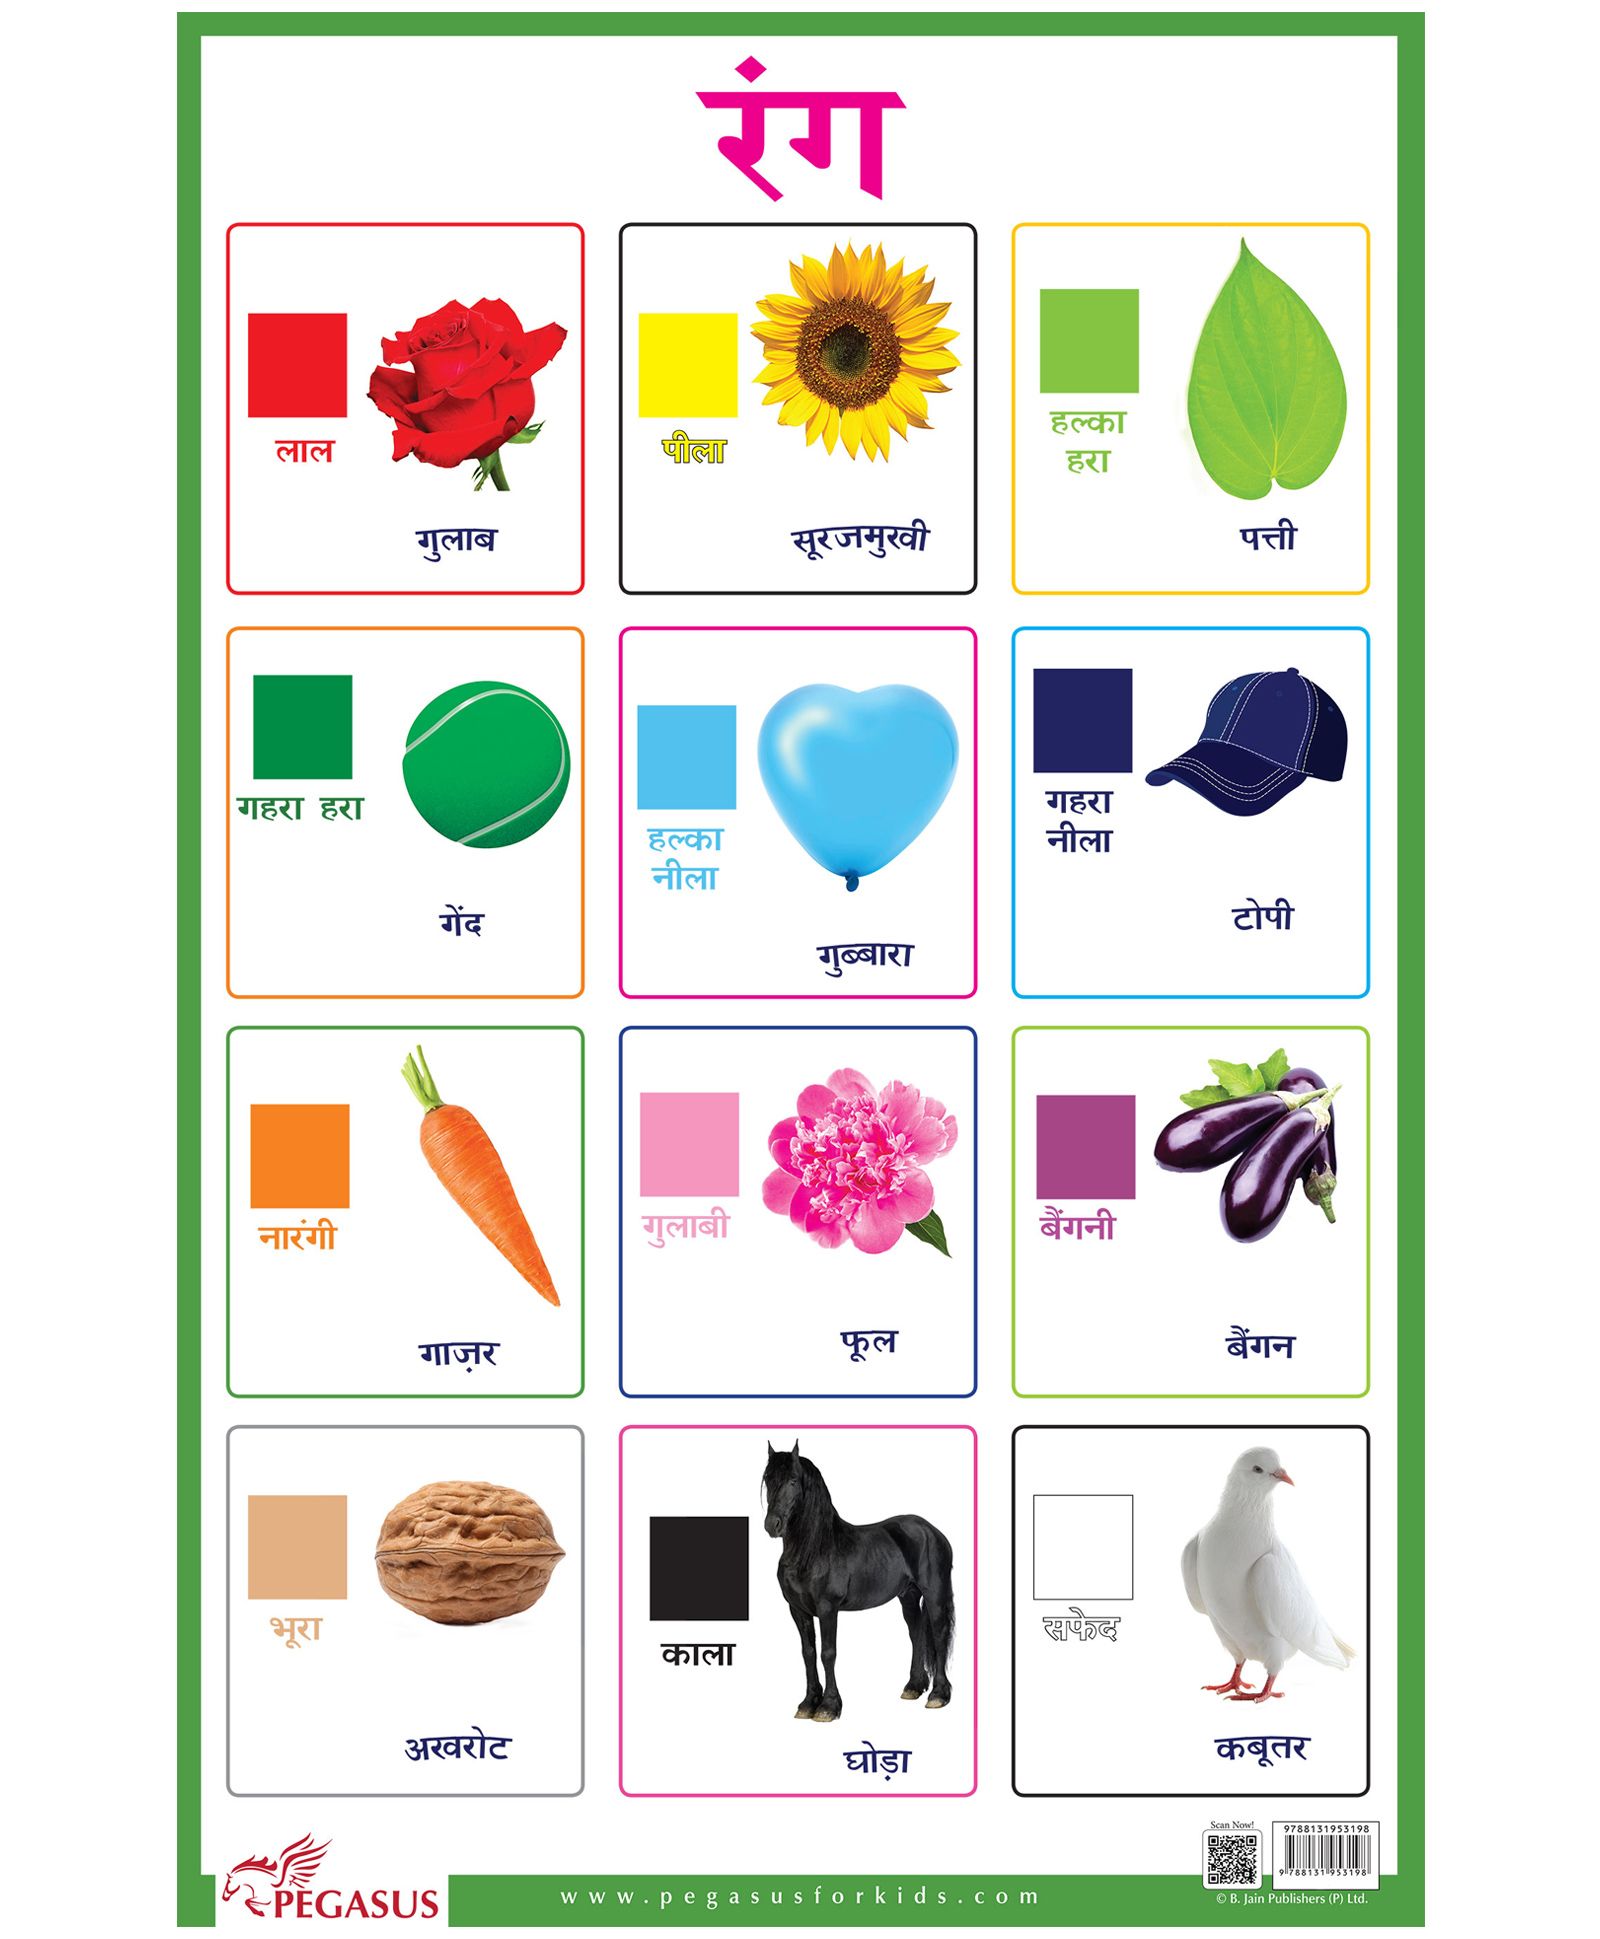 Color Chart For Kids